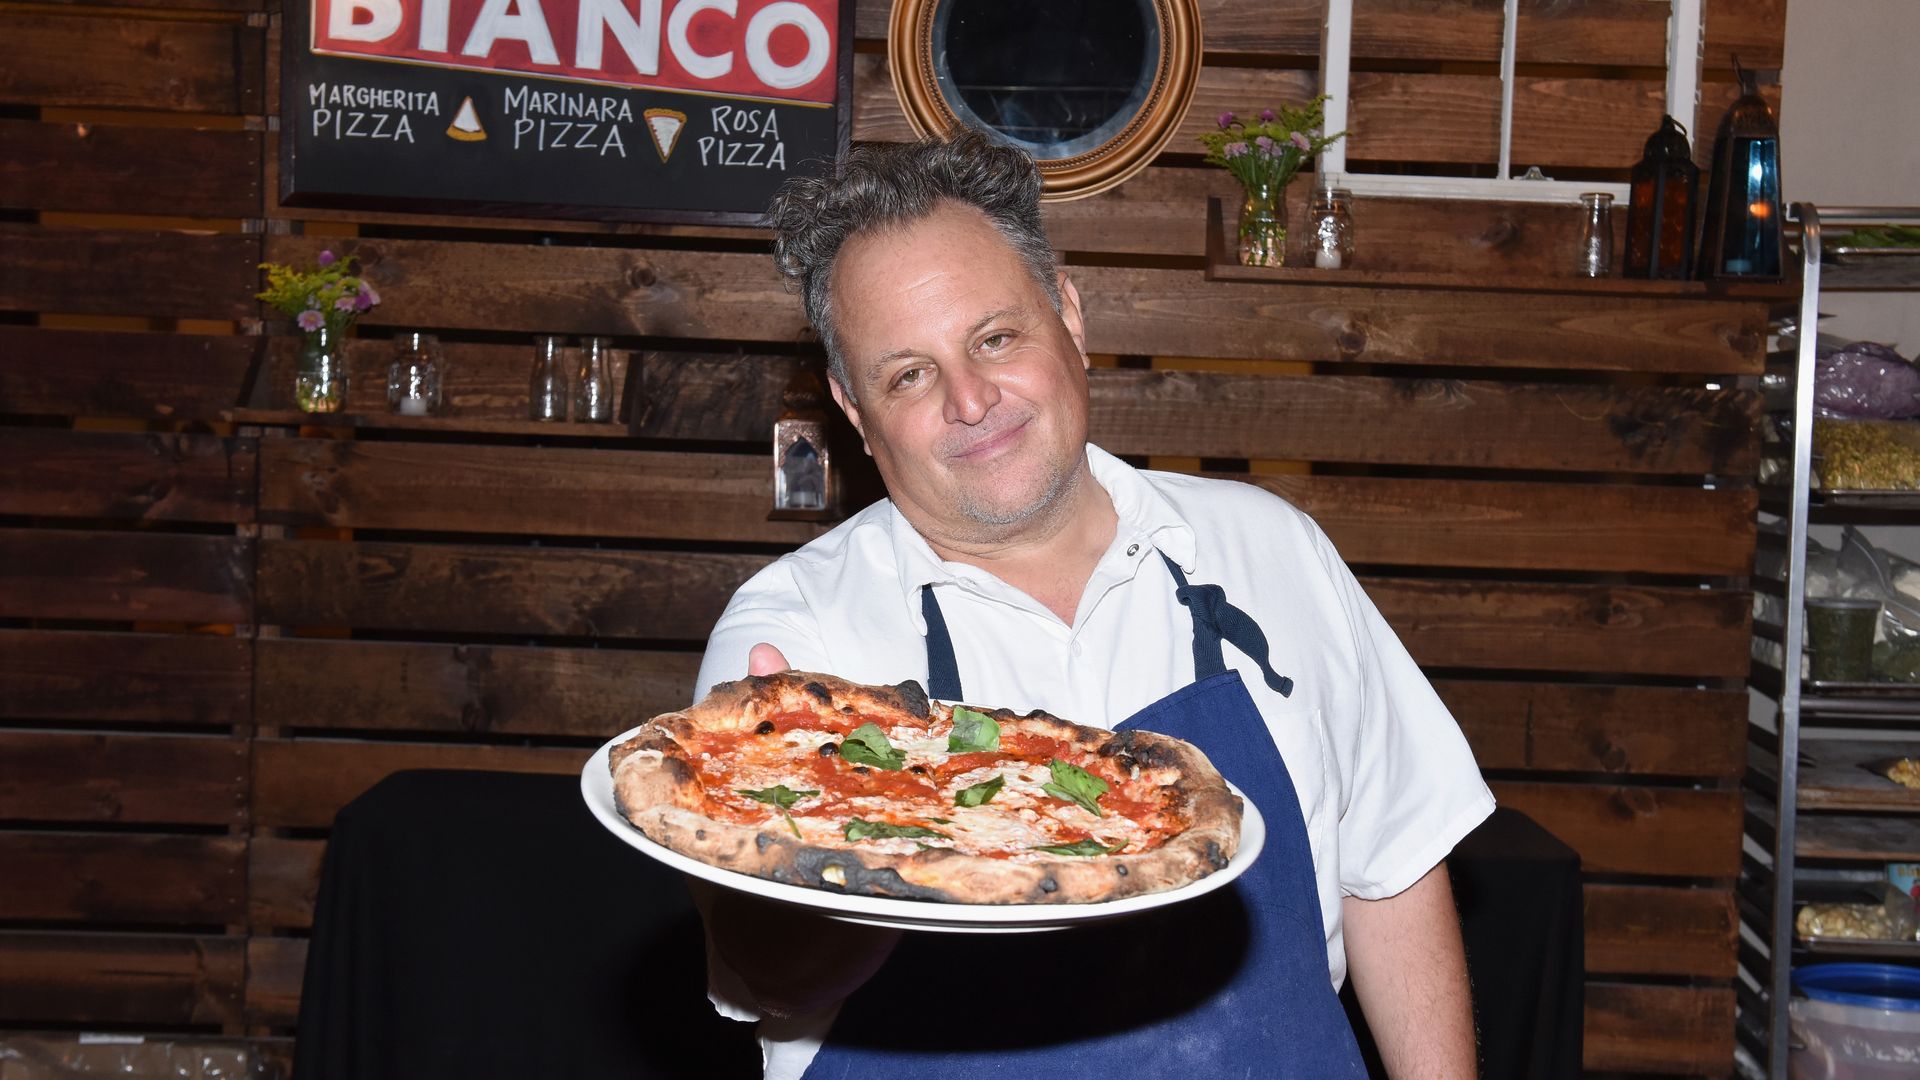 chris bianco holding a pizza